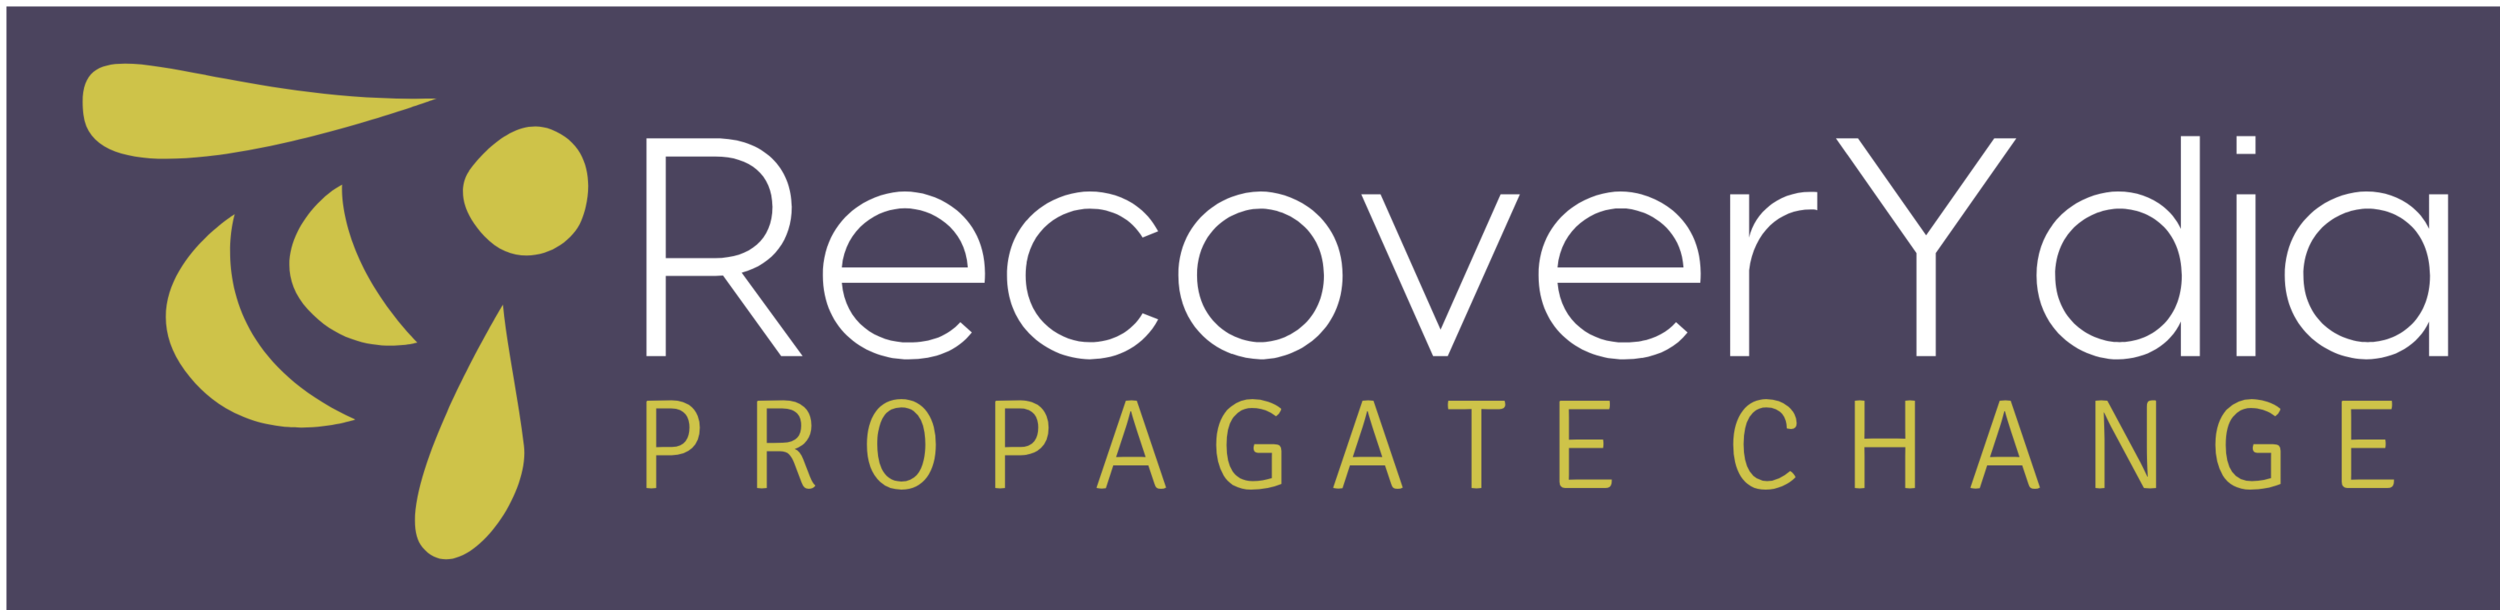 RecoverYdia | Stories of Recovery